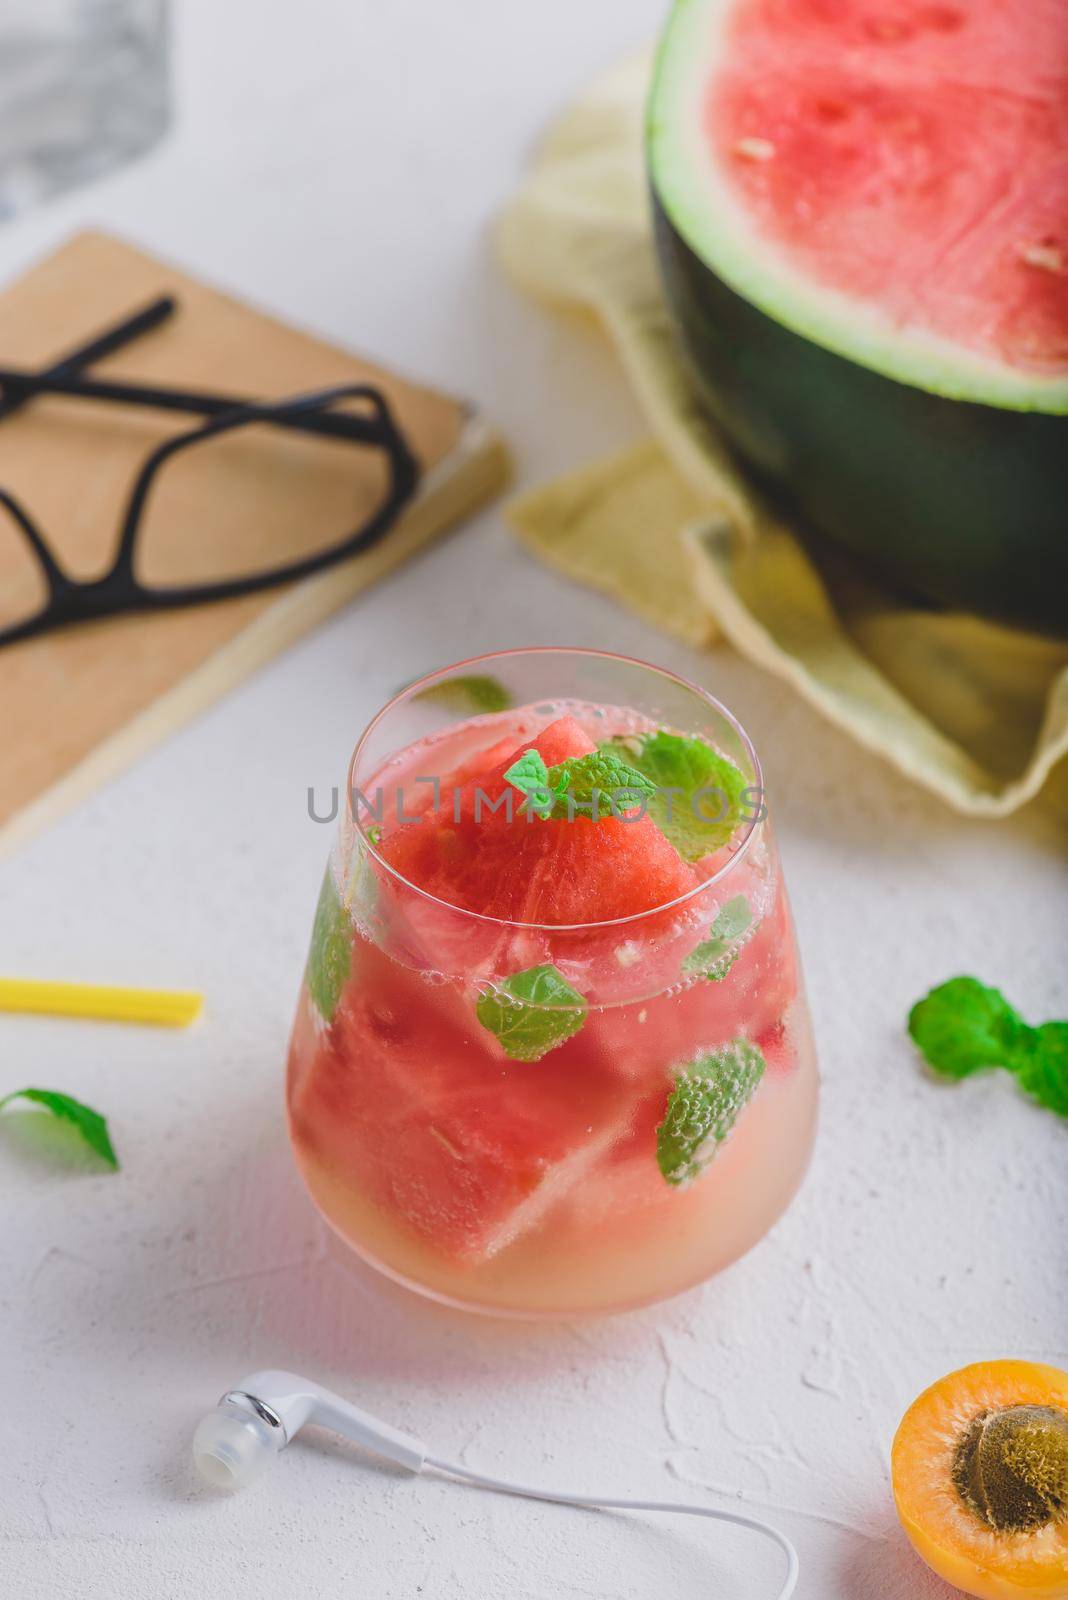 Fresh watermelon, gin cocktail with soda and garnished with mint leaves